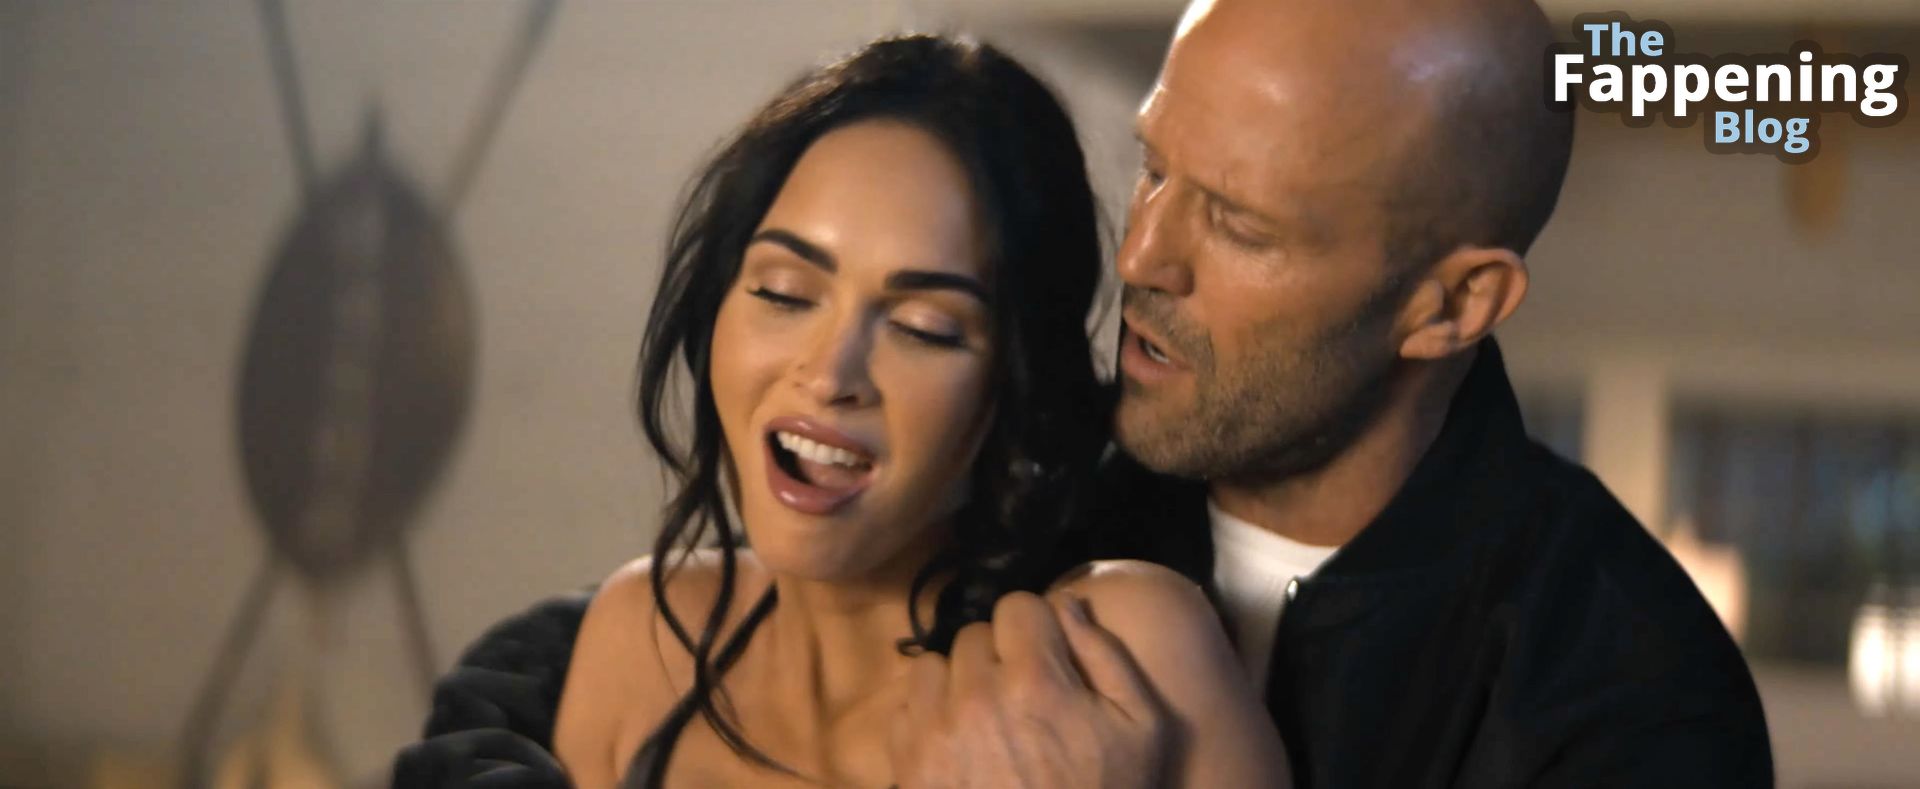 Megan Fox &amp; Jason Statham Steam Up the Screen in The Trailer for “Expendable 4” (23 Pics + Video)